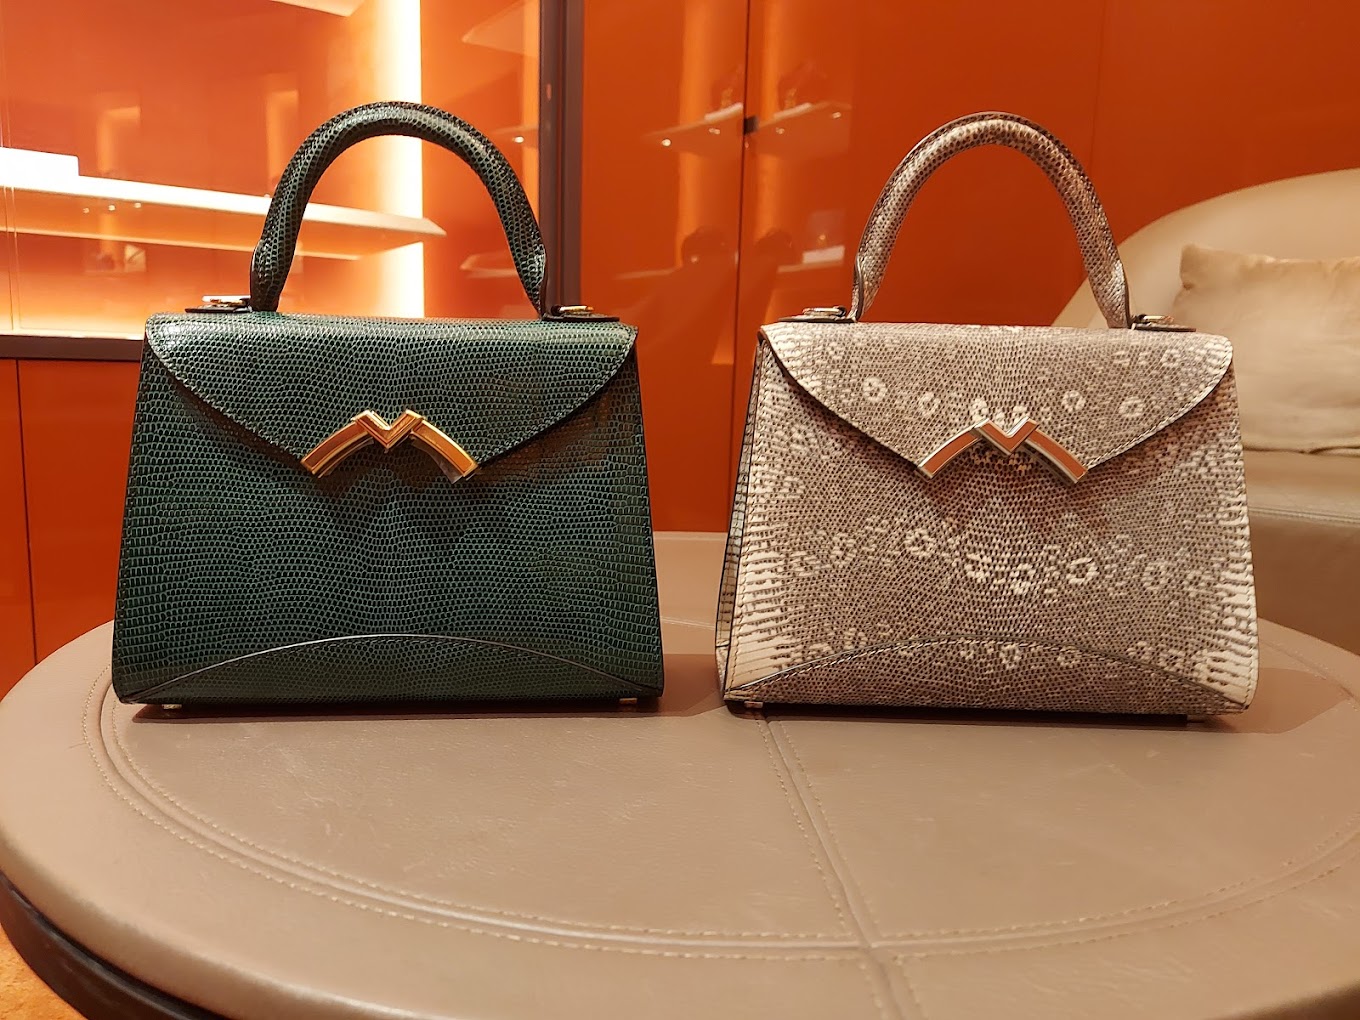 Download Elegance and sophistication in every detail: The Moynat